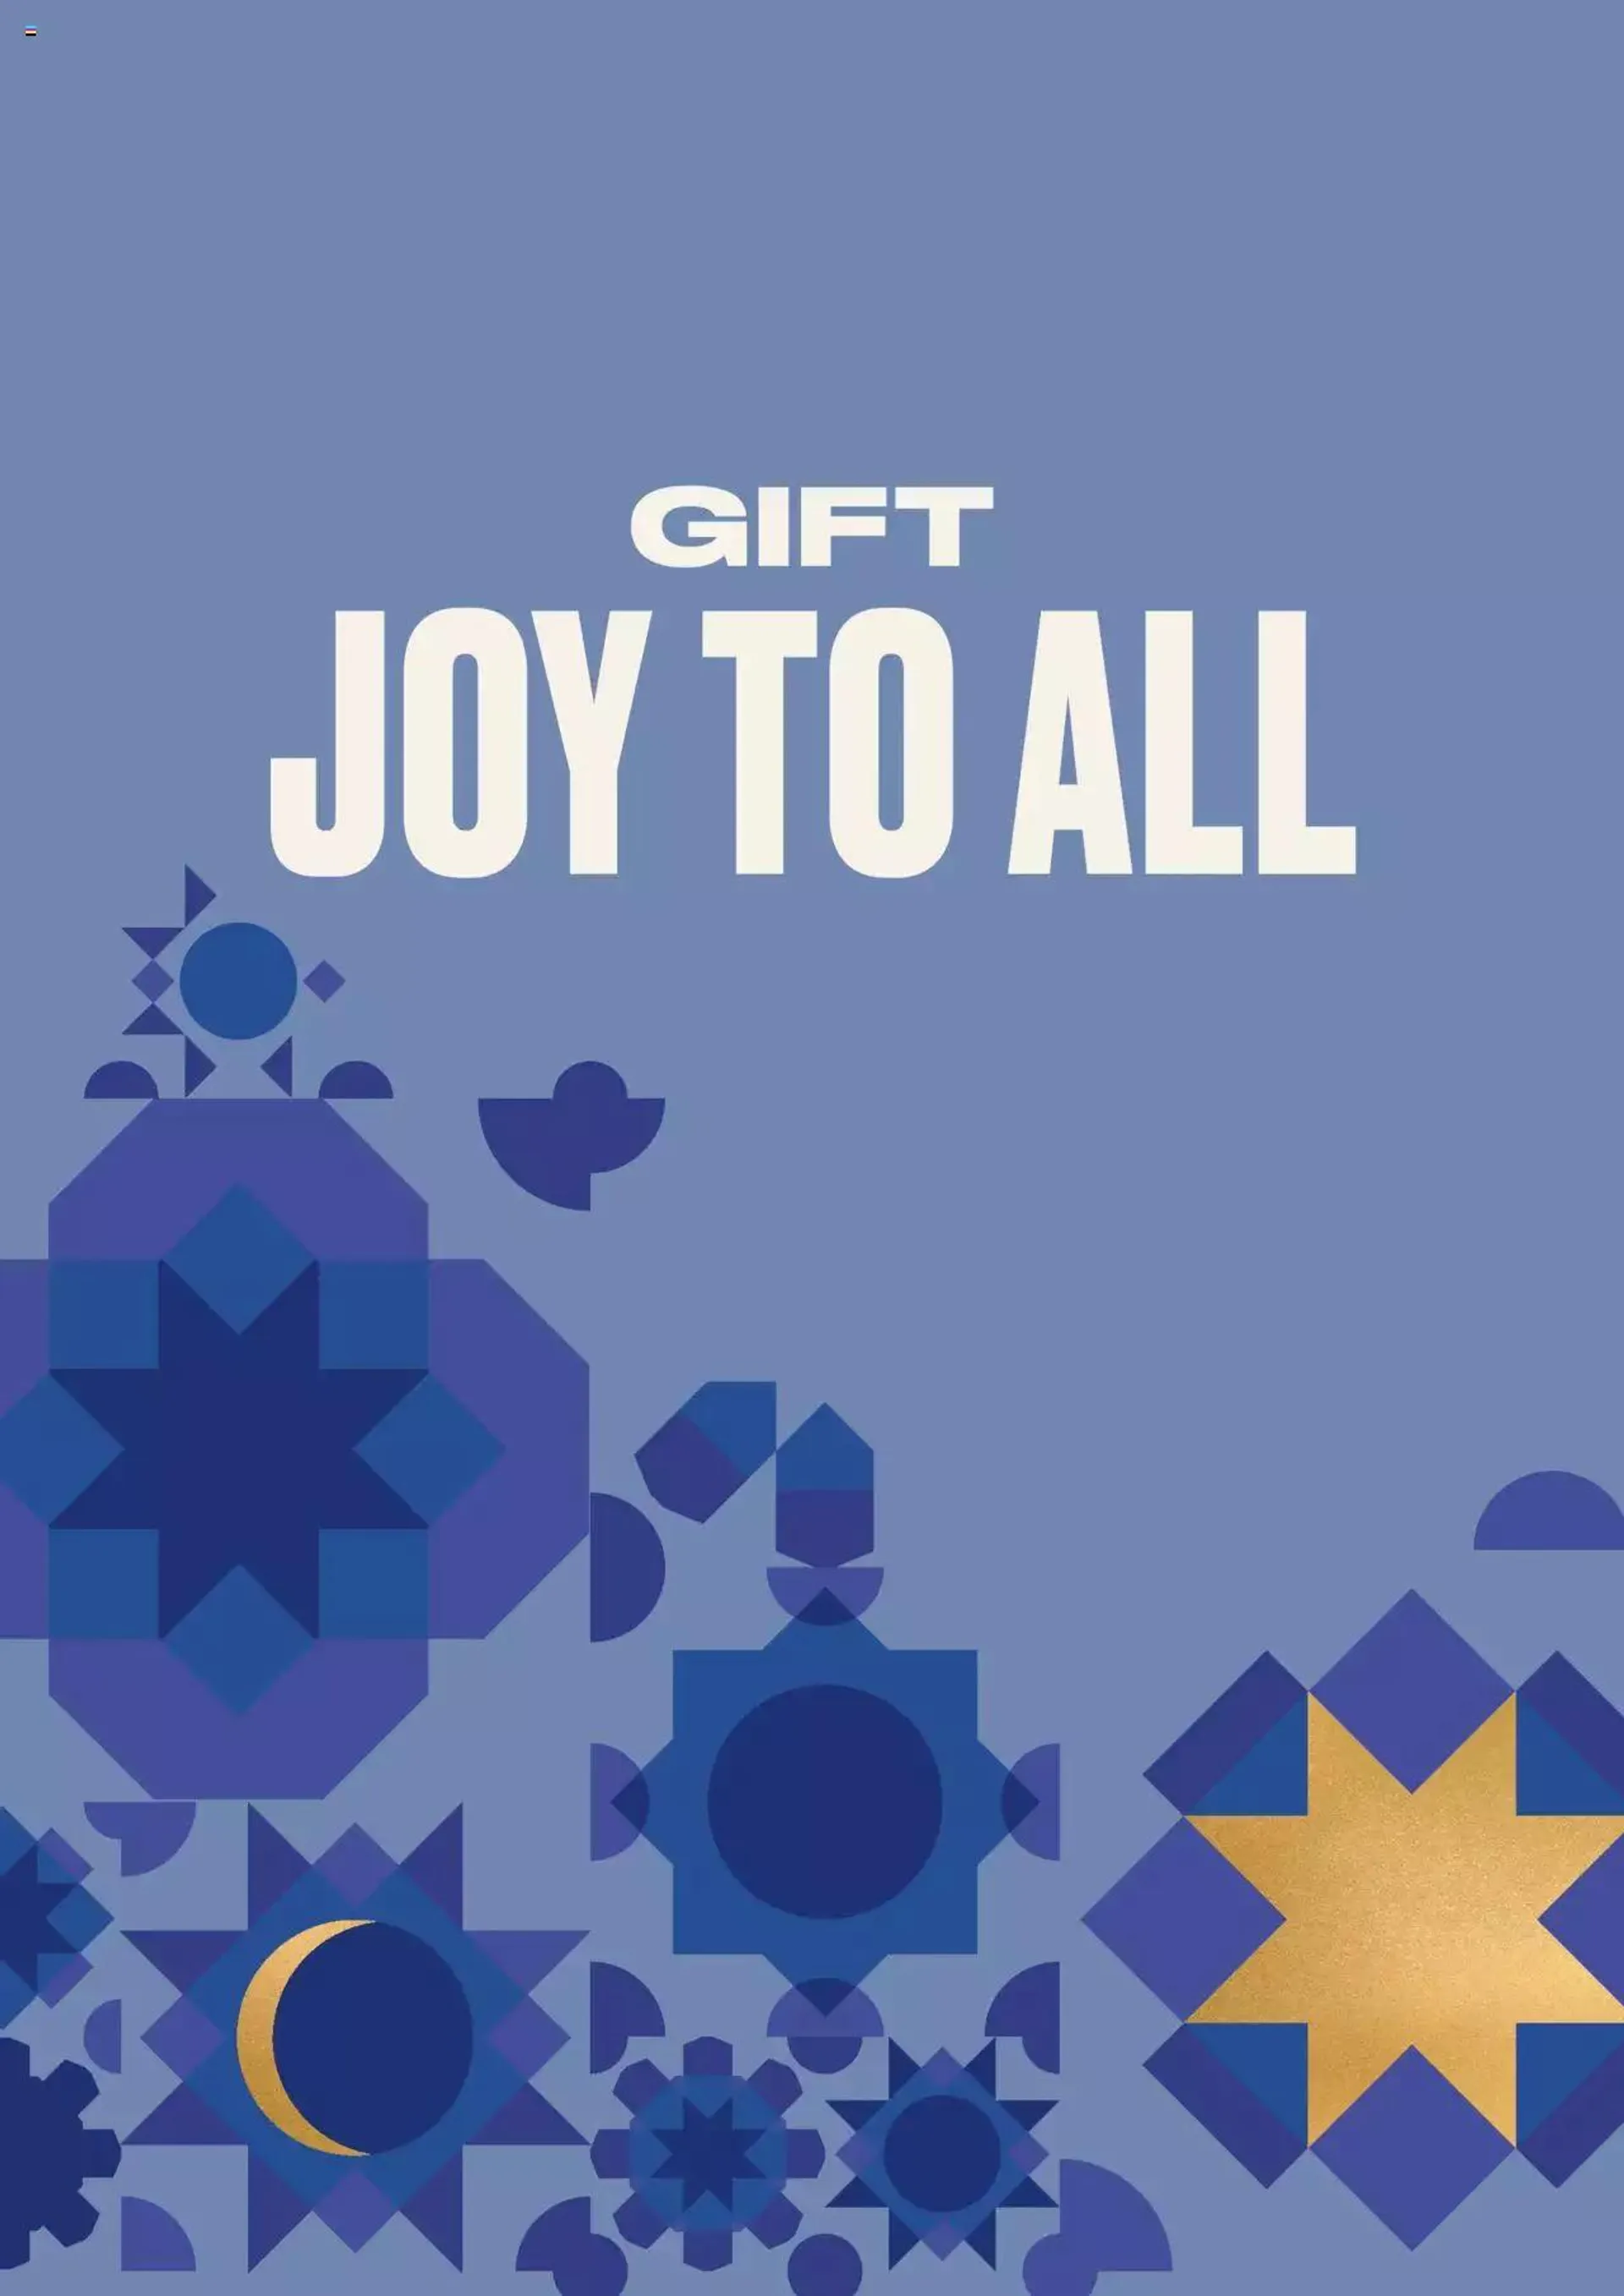 The Body Shop Lift Their Spirits Gift Guide - 7